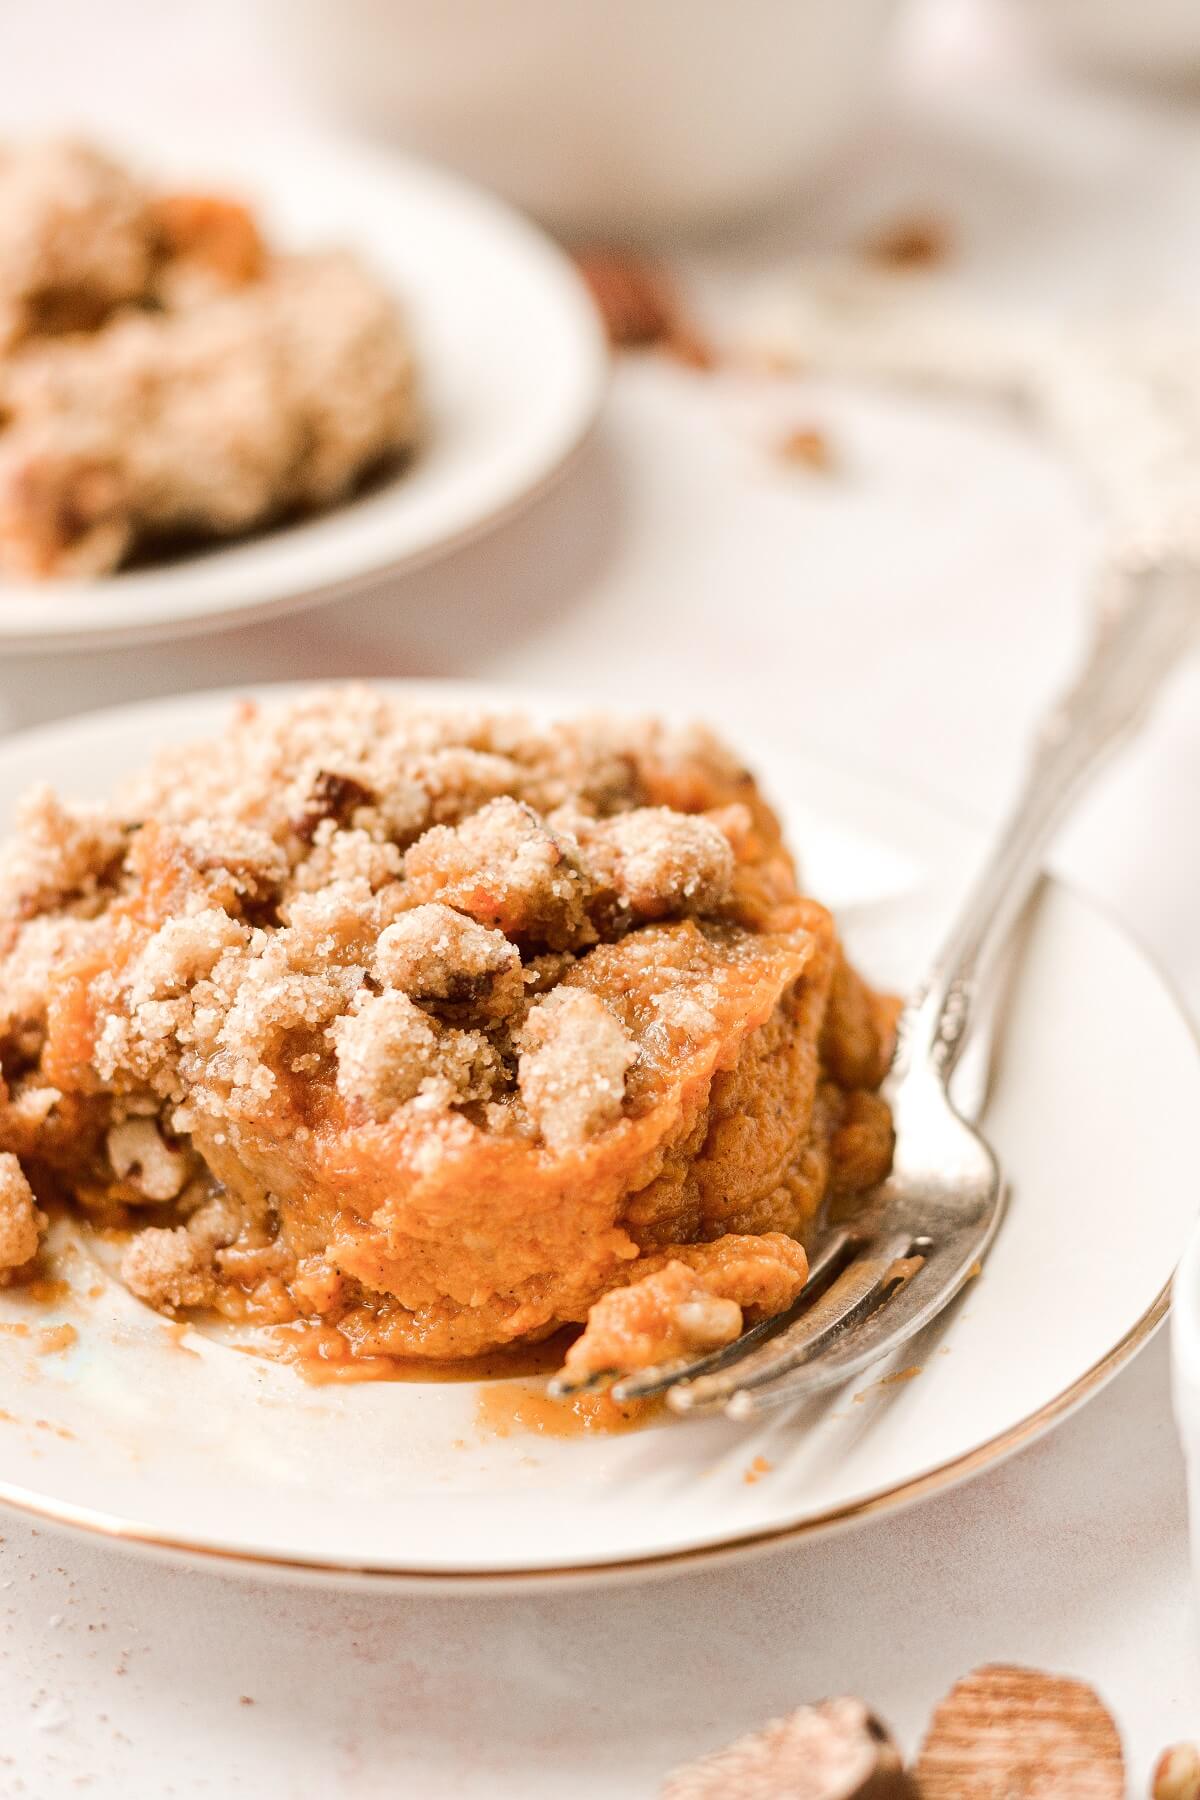 A scoop of sweet potato casserole with crumb topping on a white plate.